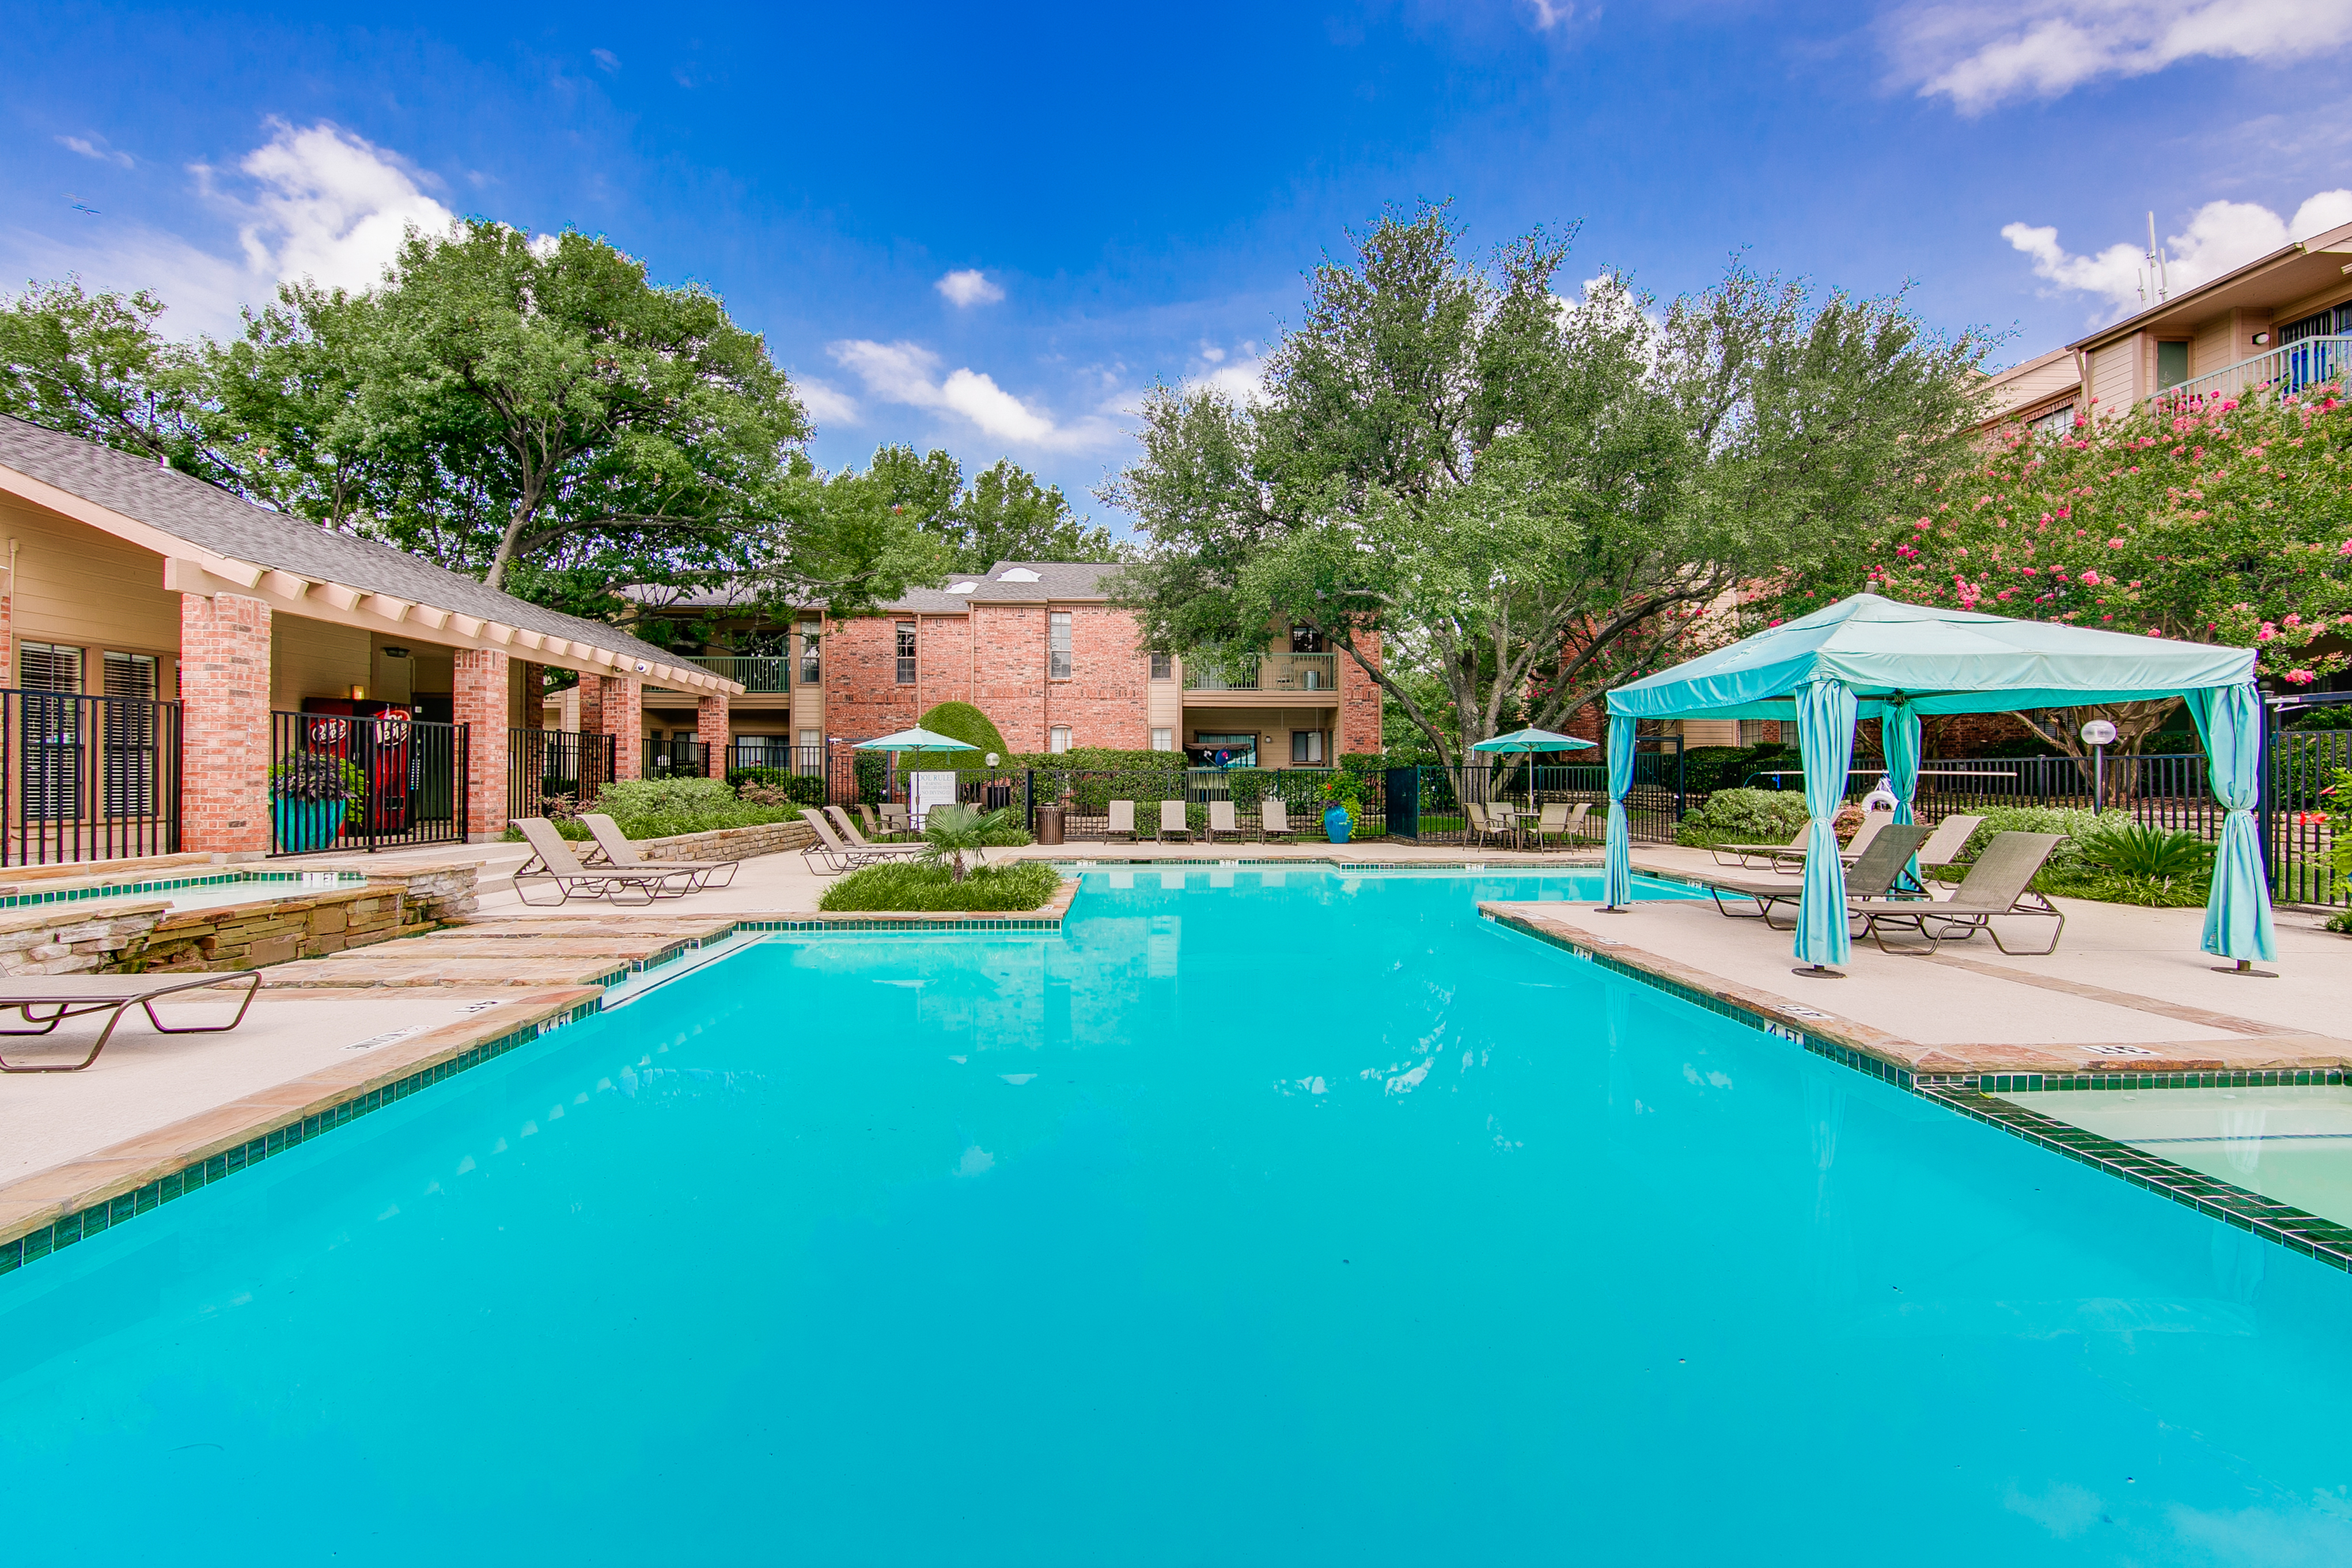 View of Pool, Showing Fenced-In Area, Loungers, Picnic Area, and Cabanas at The Oaks of North Dallas Apartments